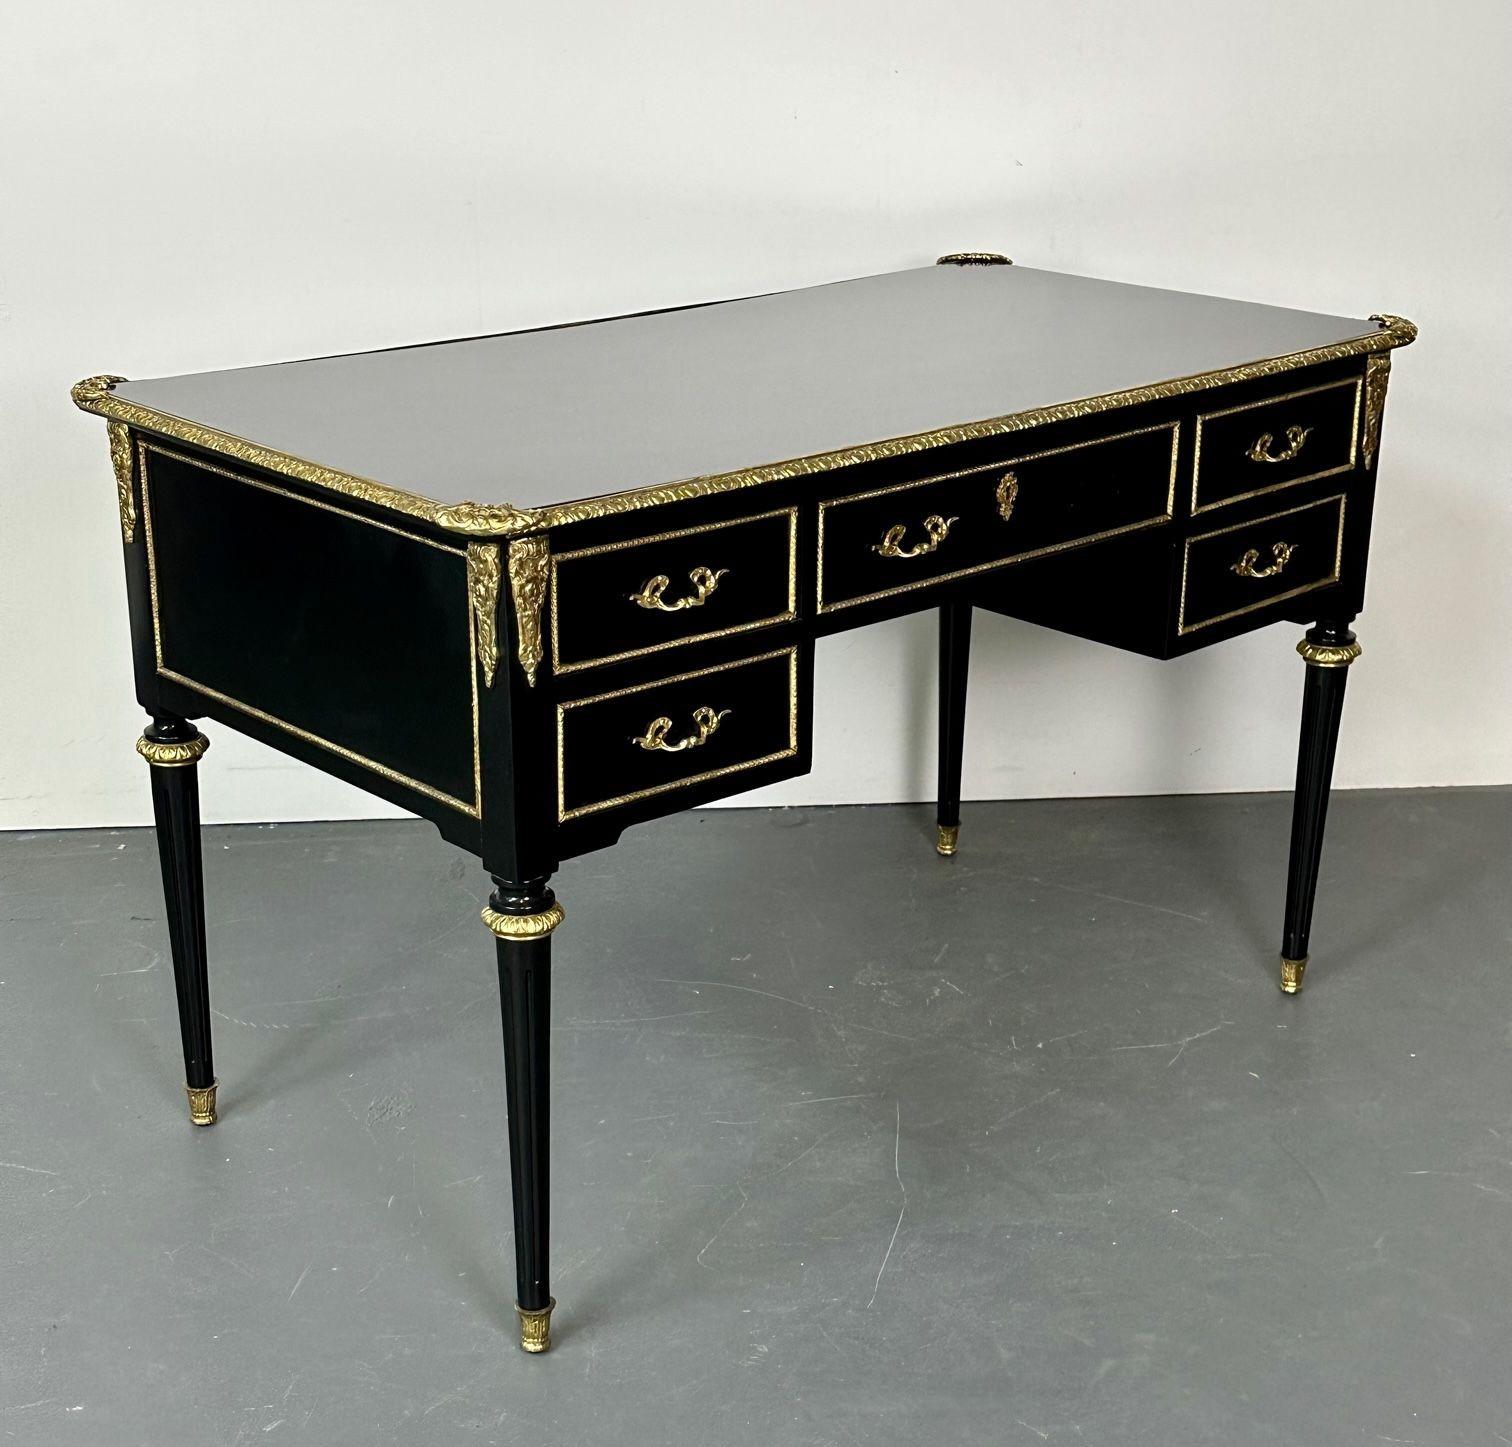 20th Century Hollywood Regency Ebony Desk, Writing Table or Vanity, Bronze Mounted, 1930s For Sale